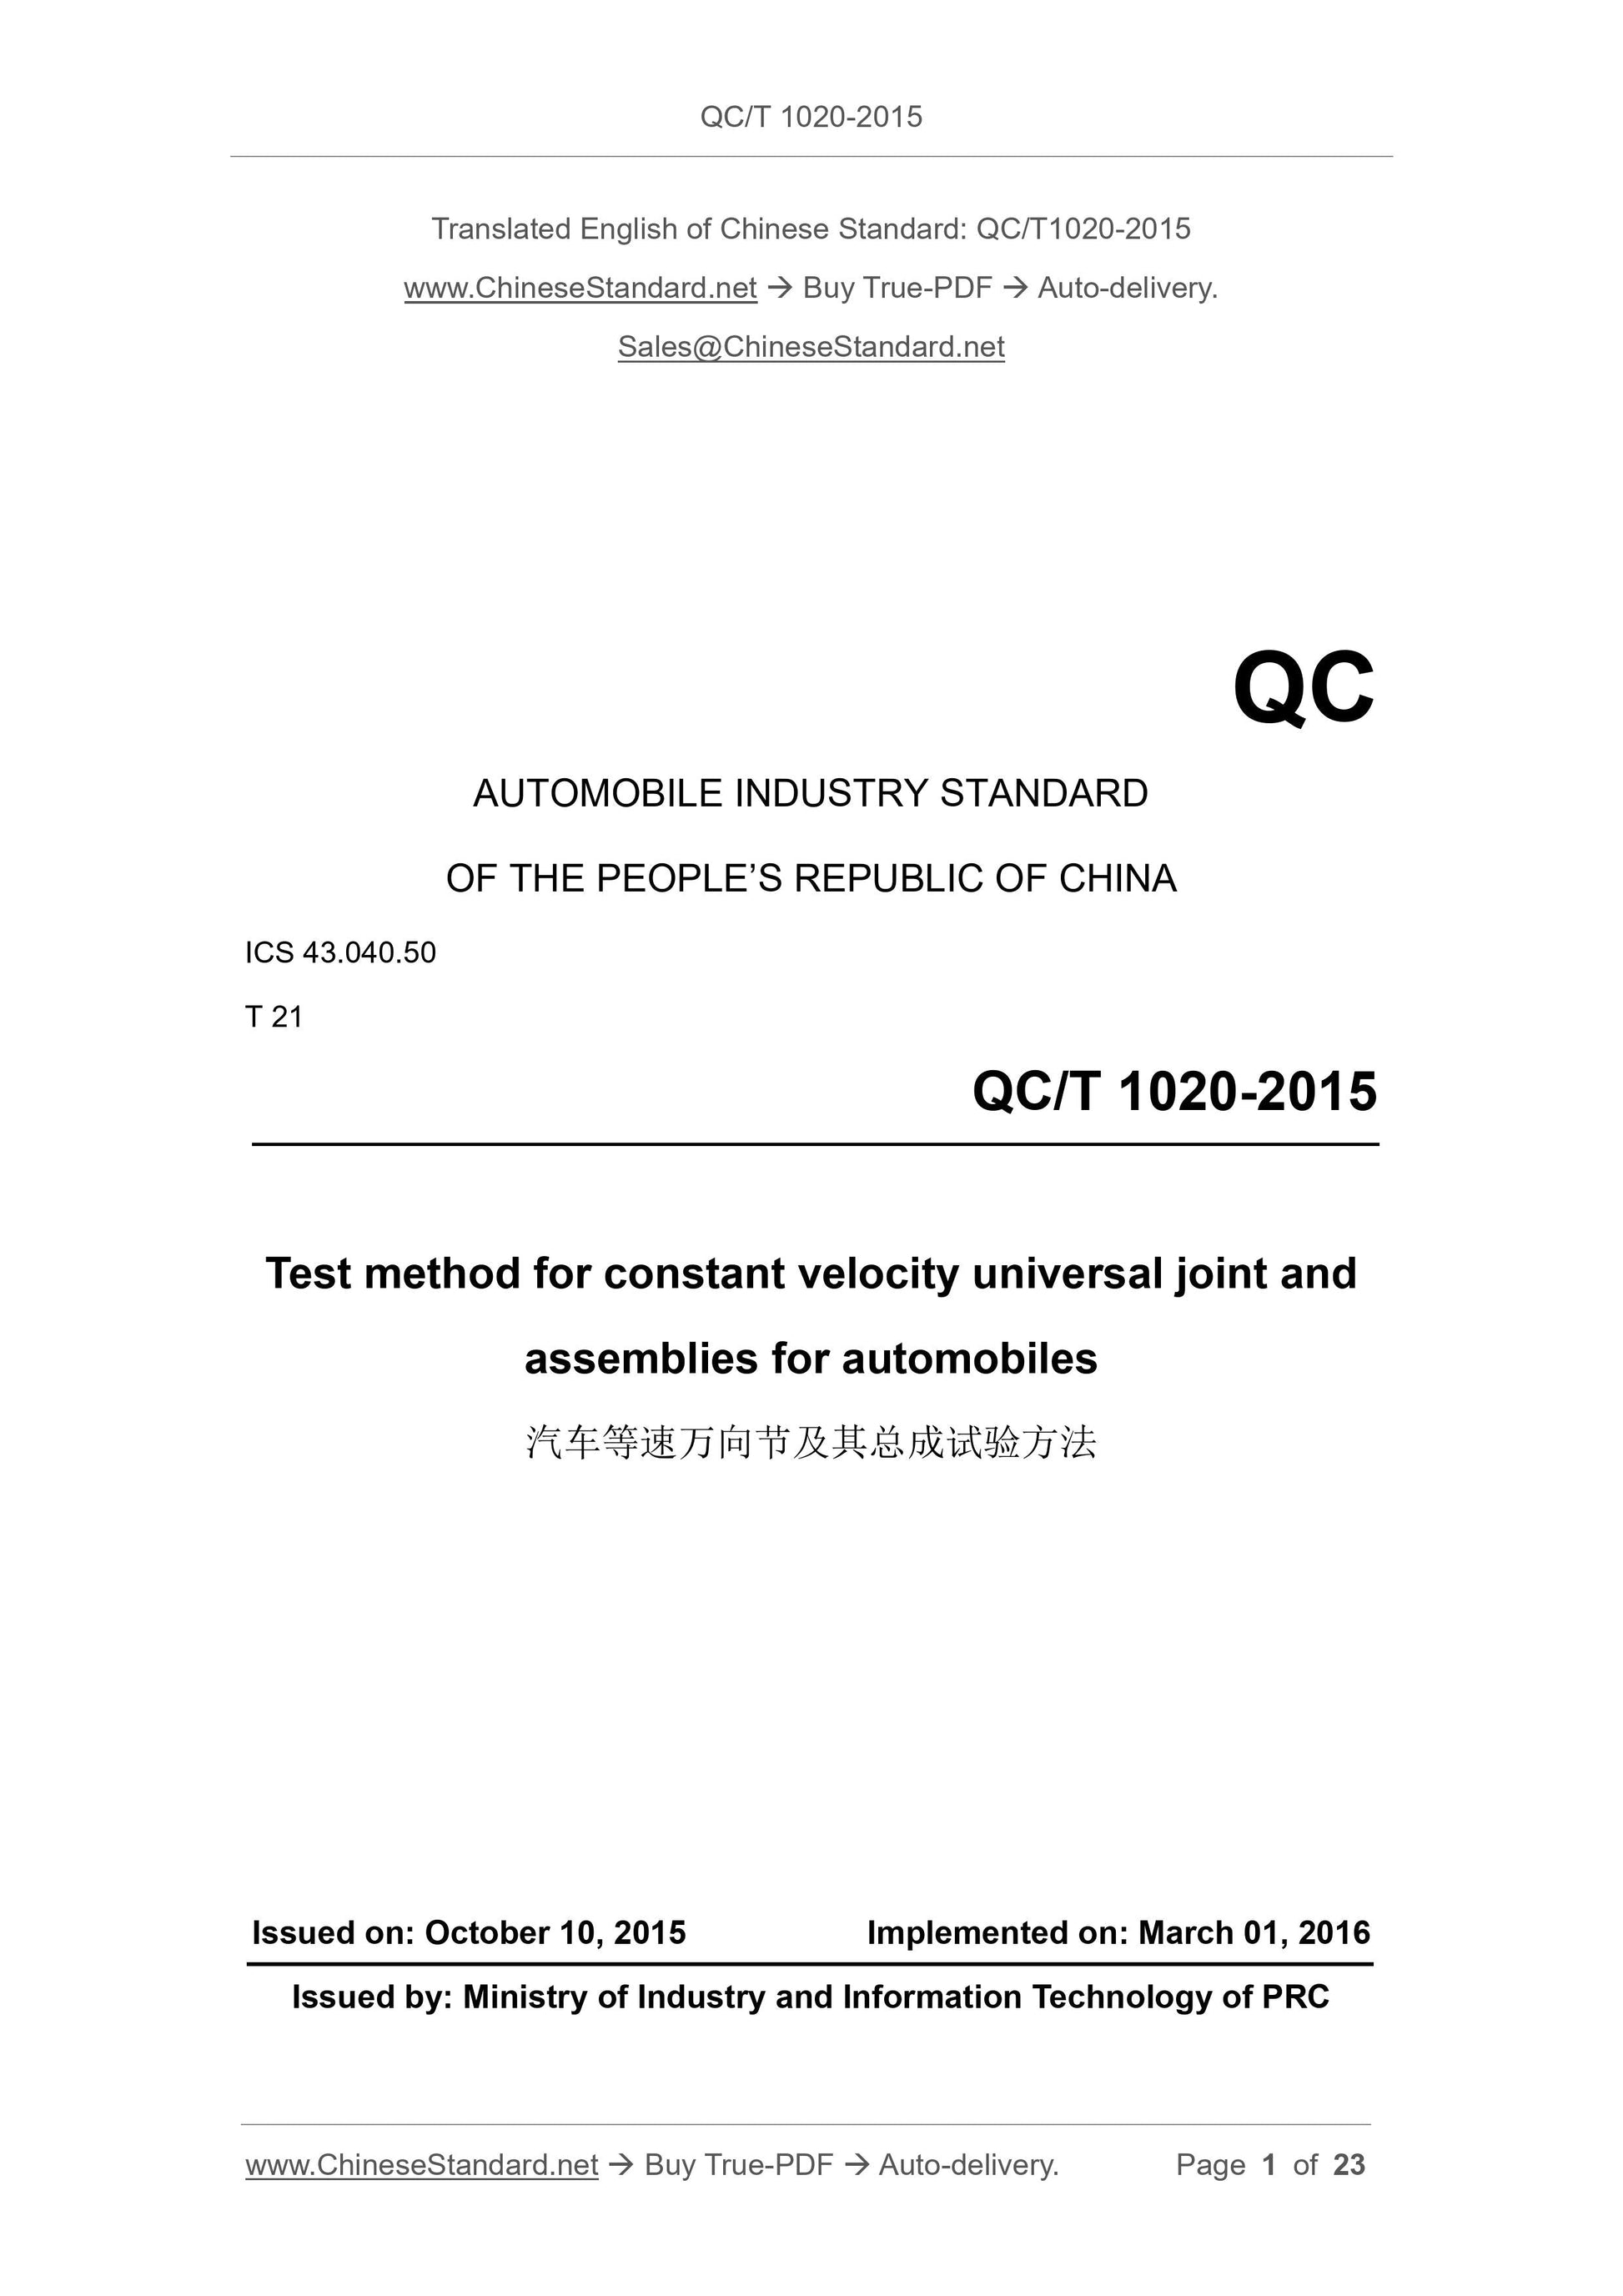 QC/T 1020-2015 Page 1